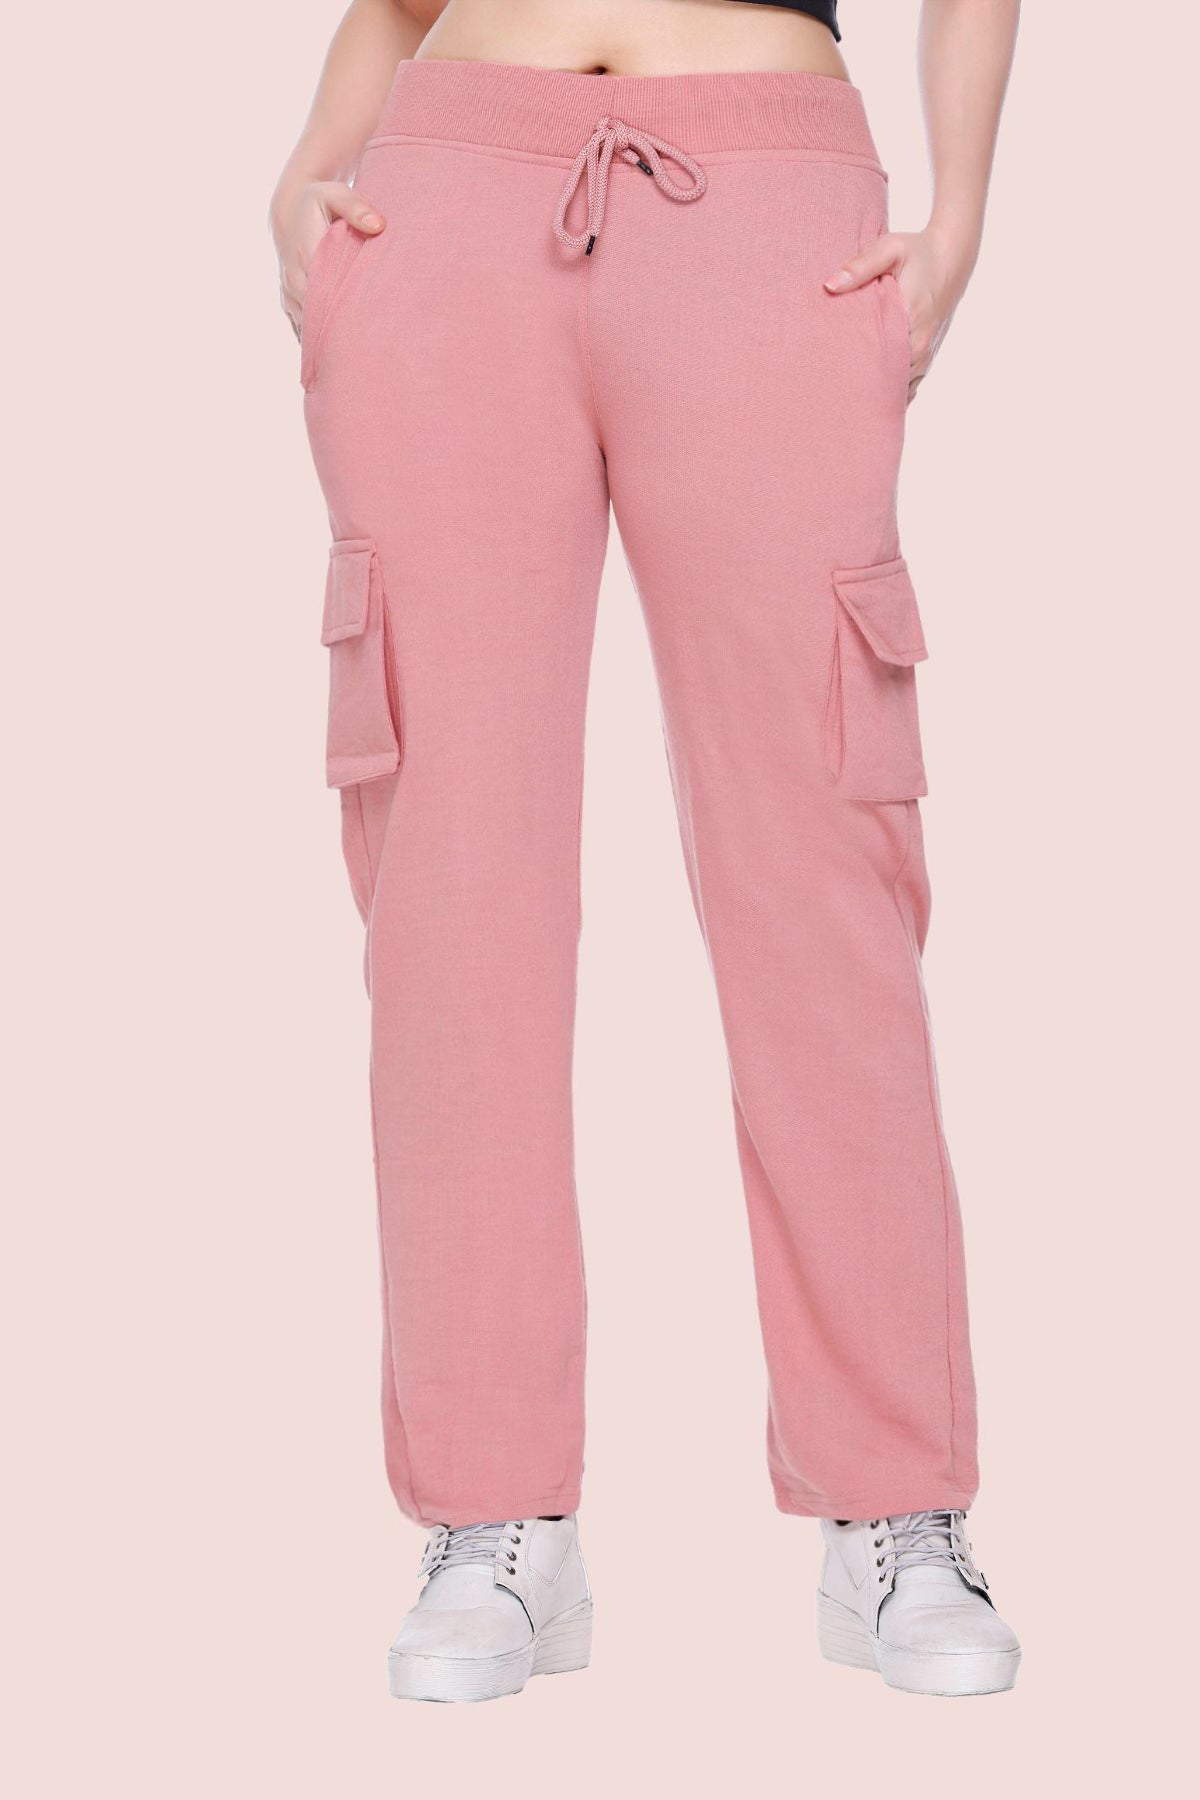 White Moon Women Solid Onion Track Pants